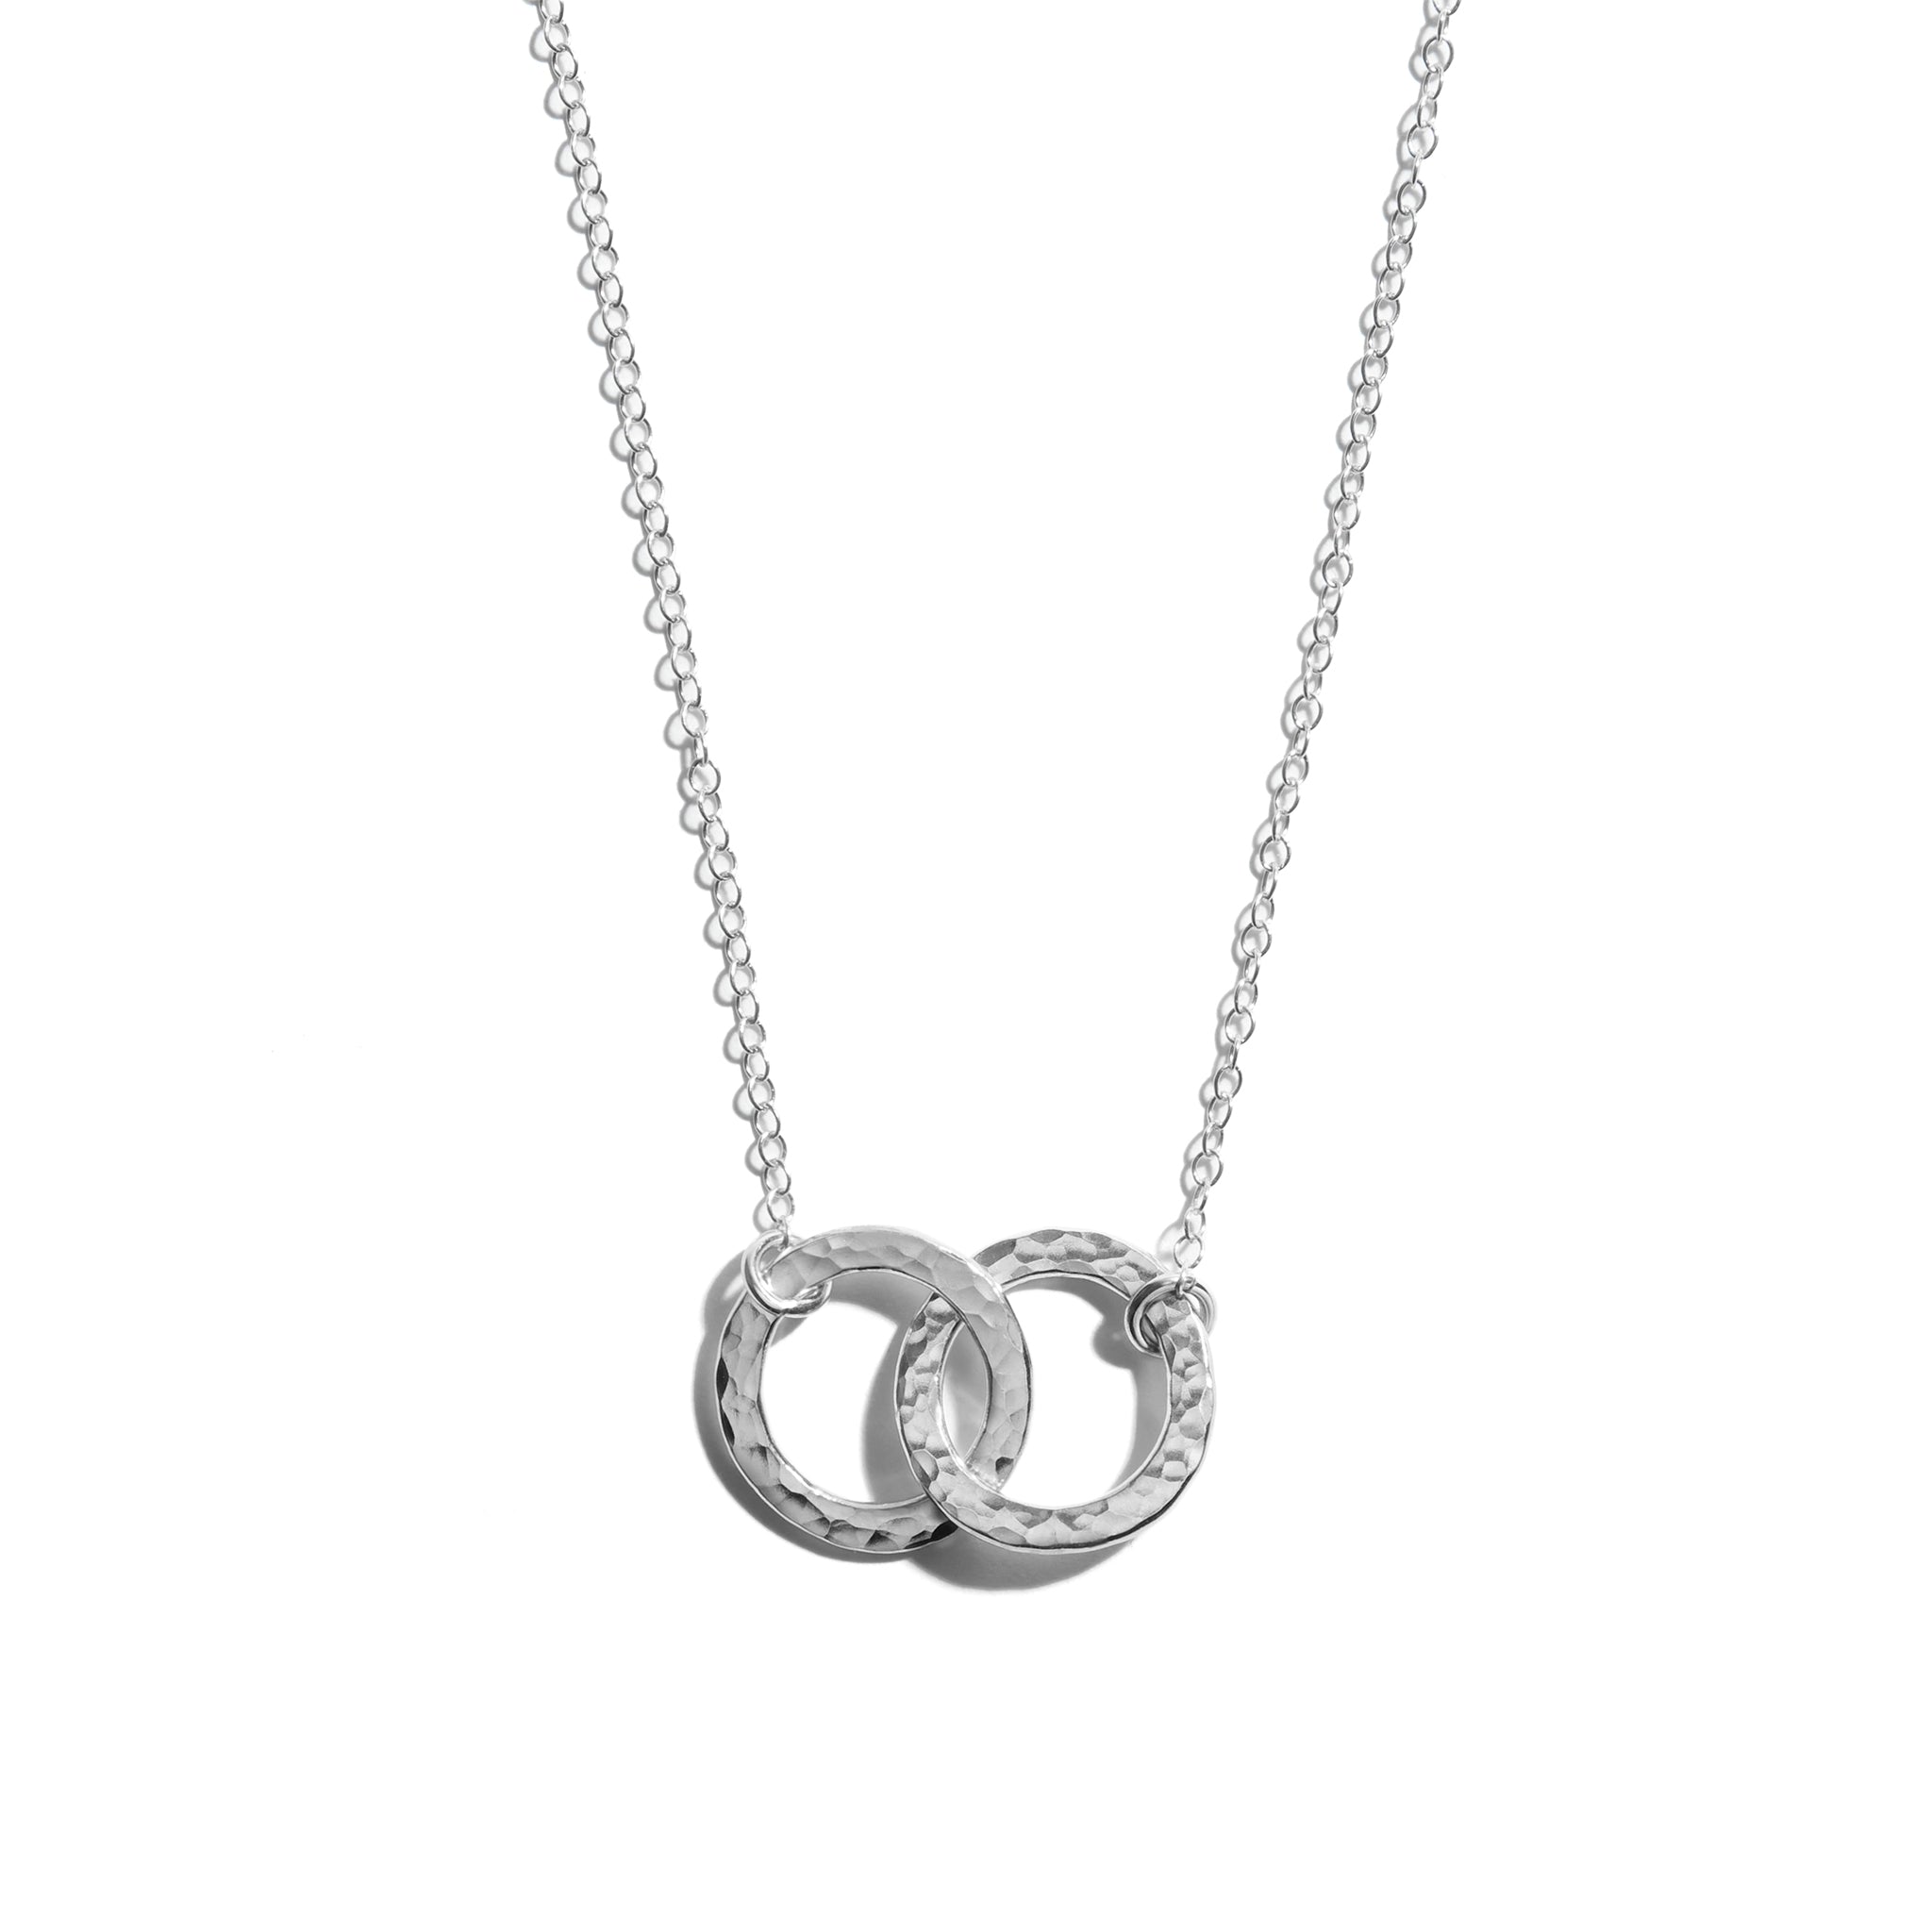 Photo of a small double circle necklace crafted from sterling silver. This elegant piece makes the perfect gift for someone special.